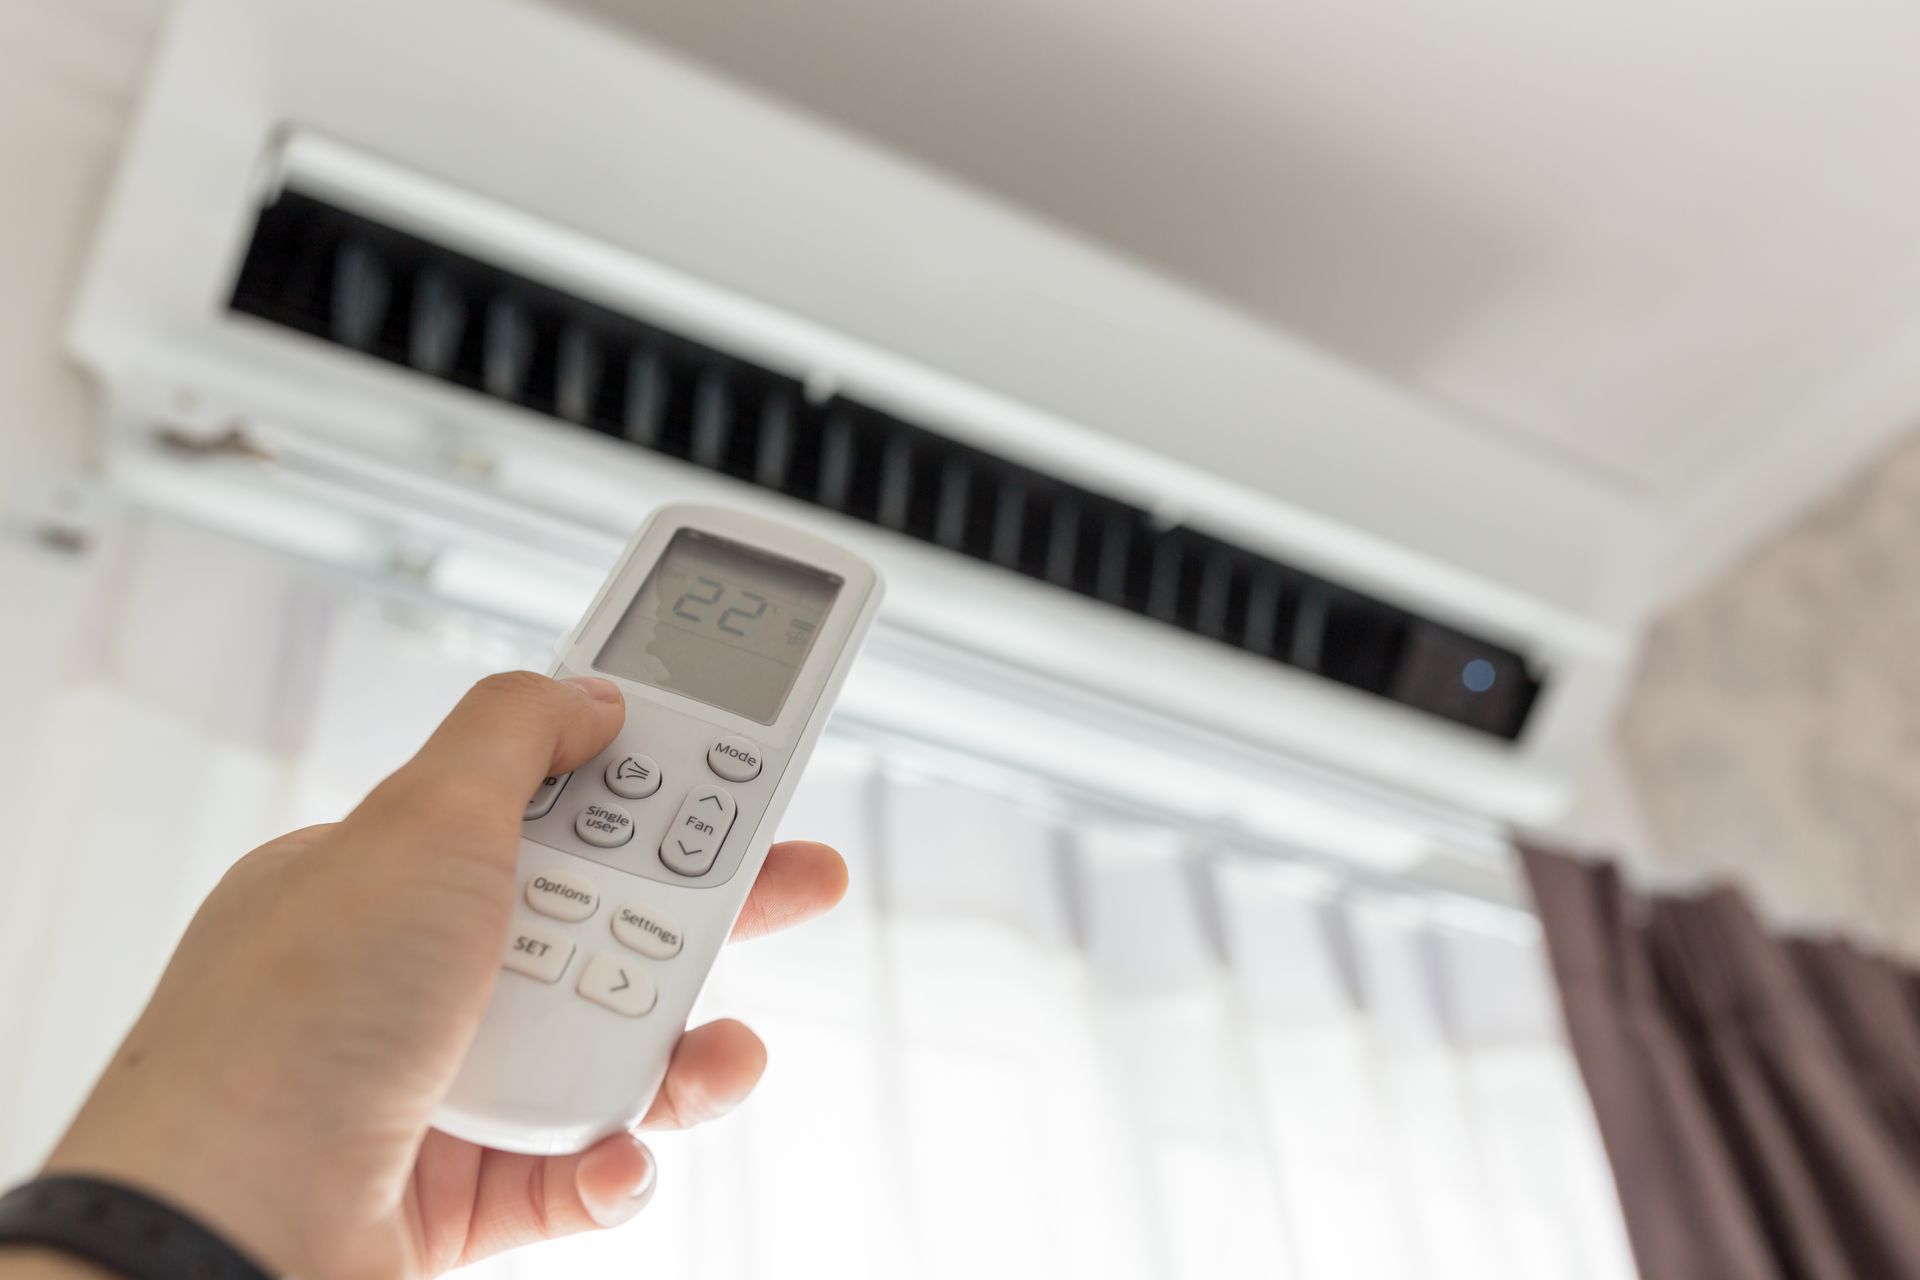 Changing the Air Condition Temperature